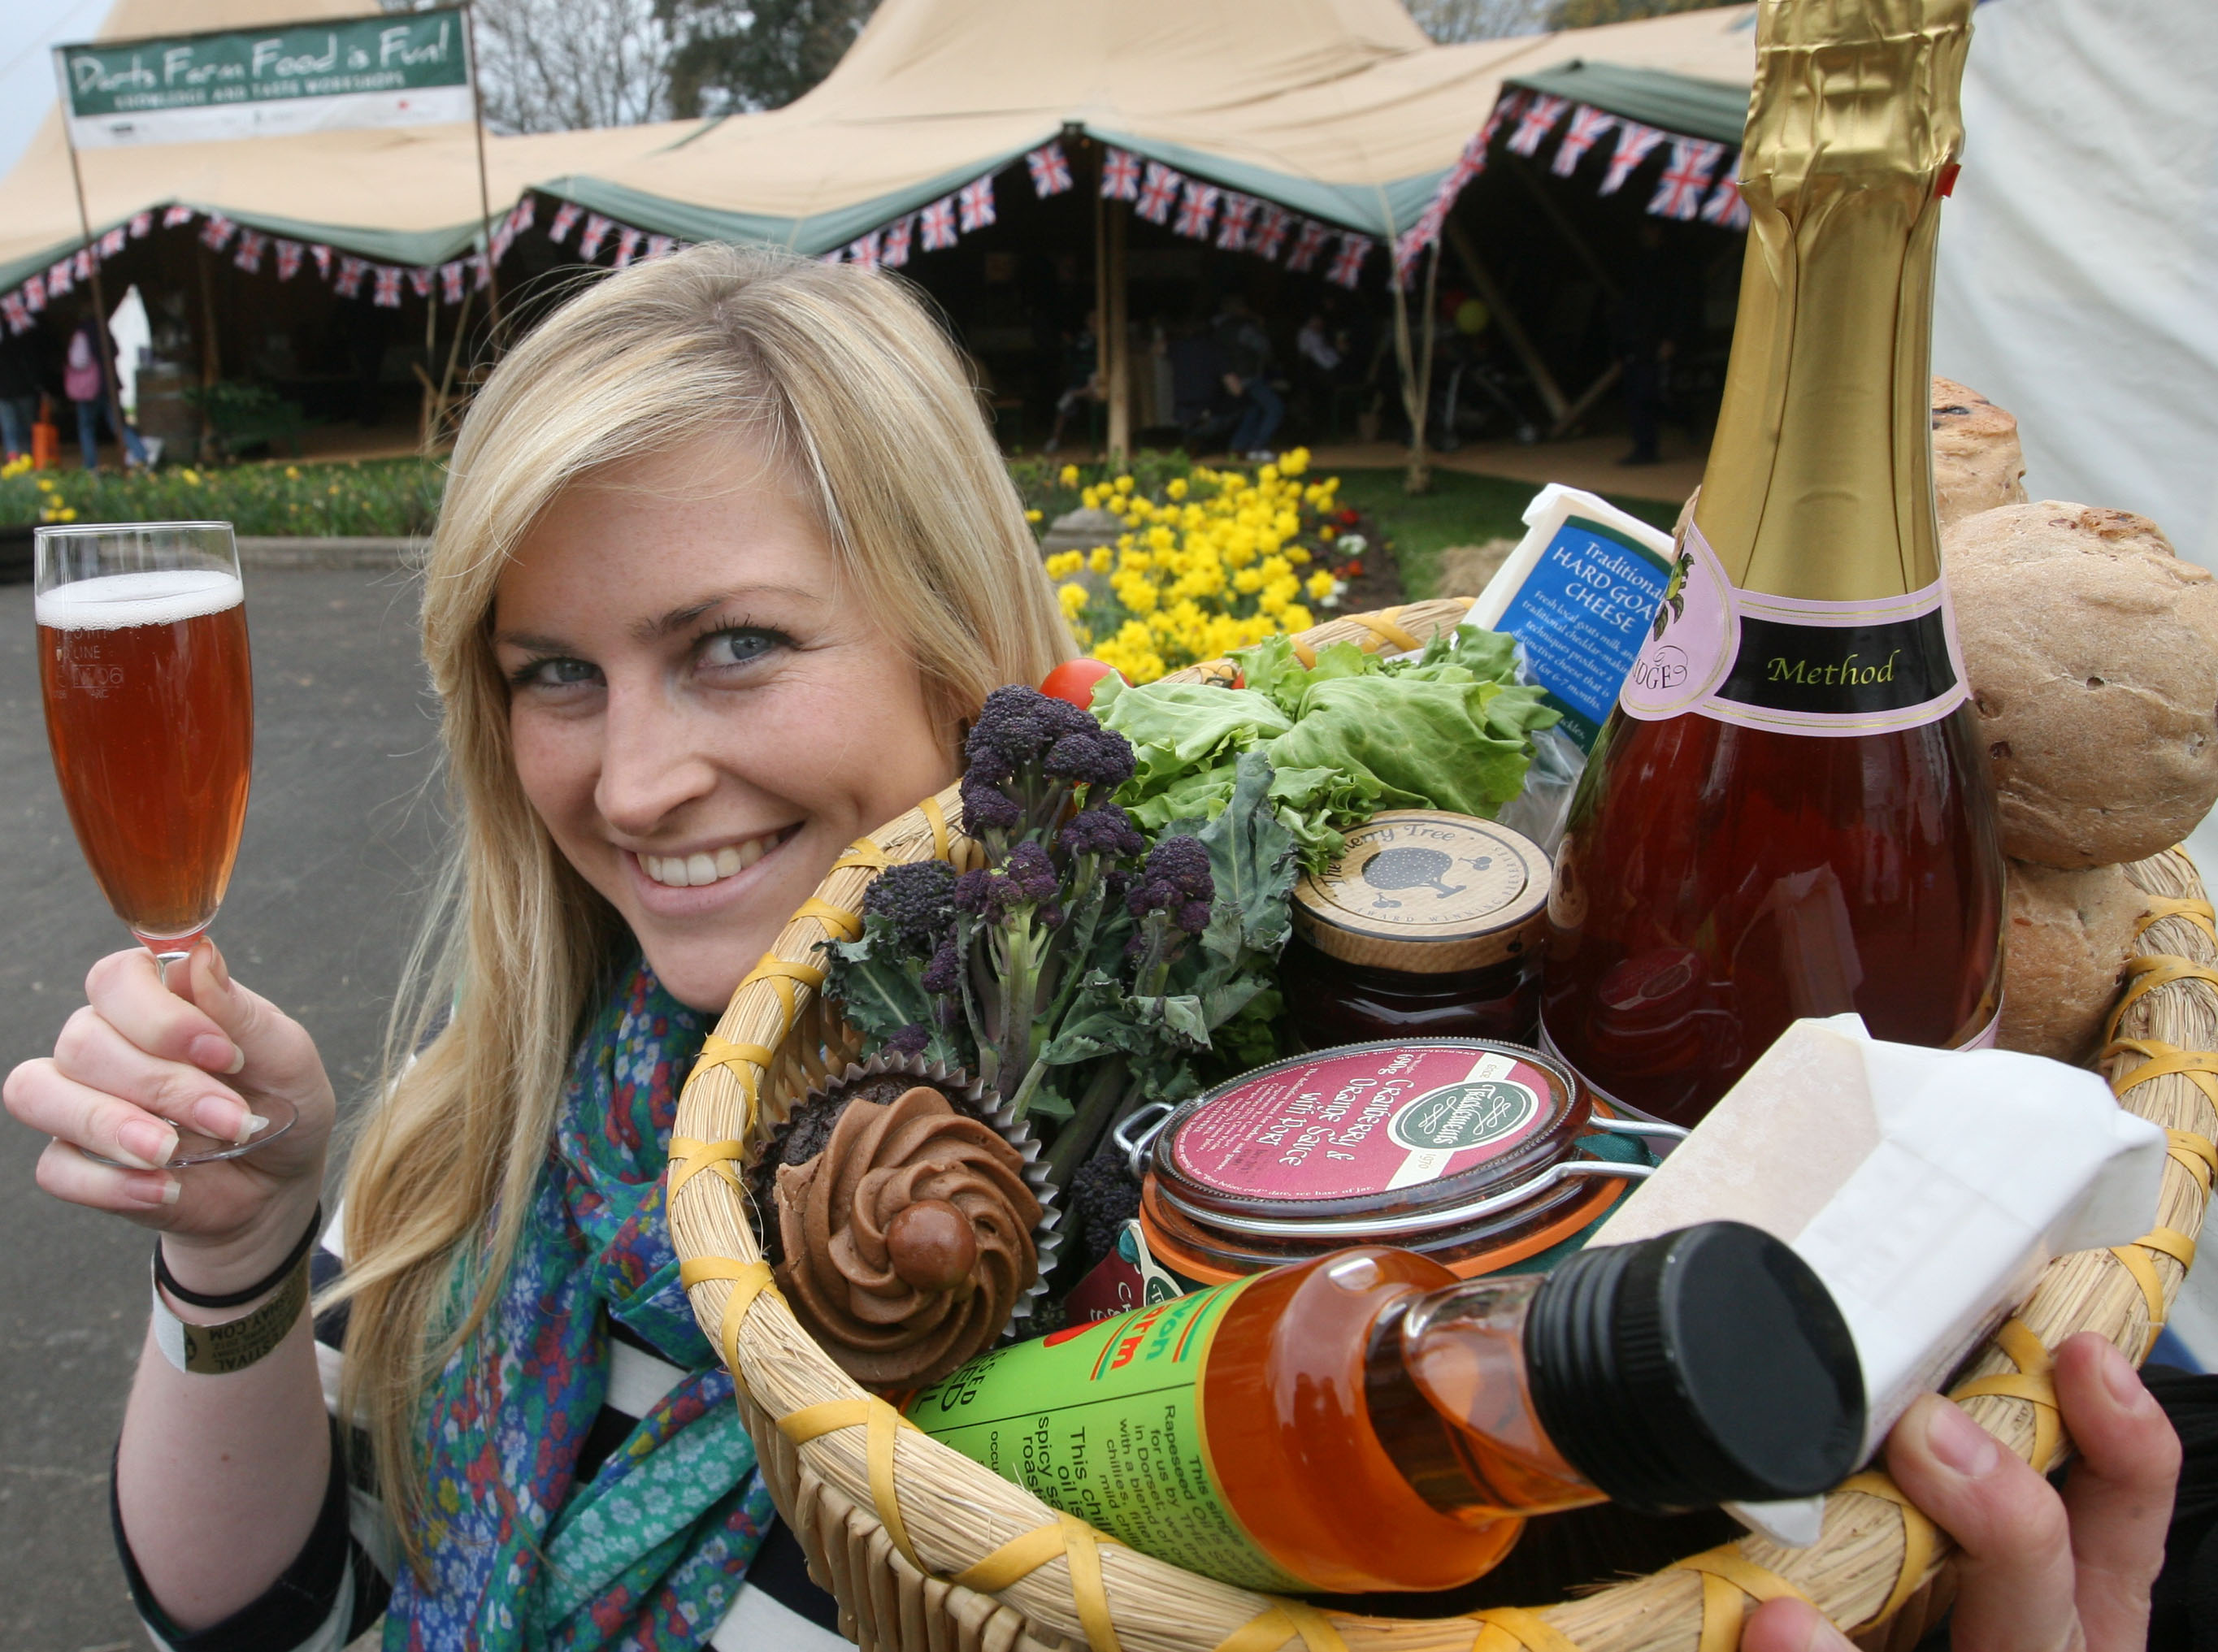 Exeter Festival of Food & Drink celebrates 10th year | The Exeter Daily